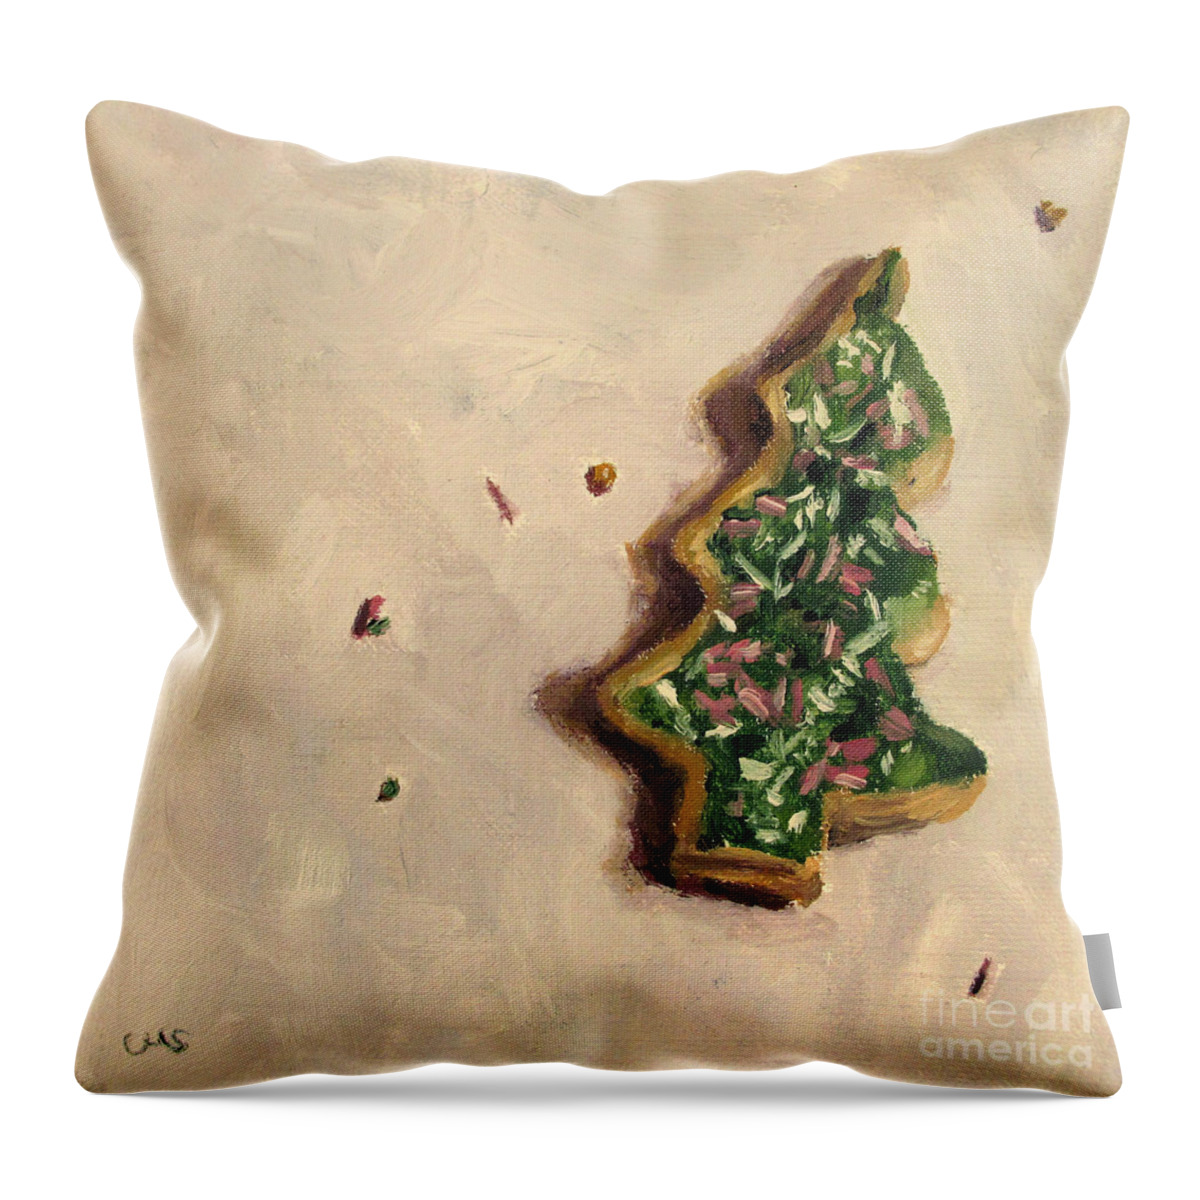 Christmas Throw Pillow featuring the painting Christmas Tree Cookie by Ulrike Miesen-Schuermann